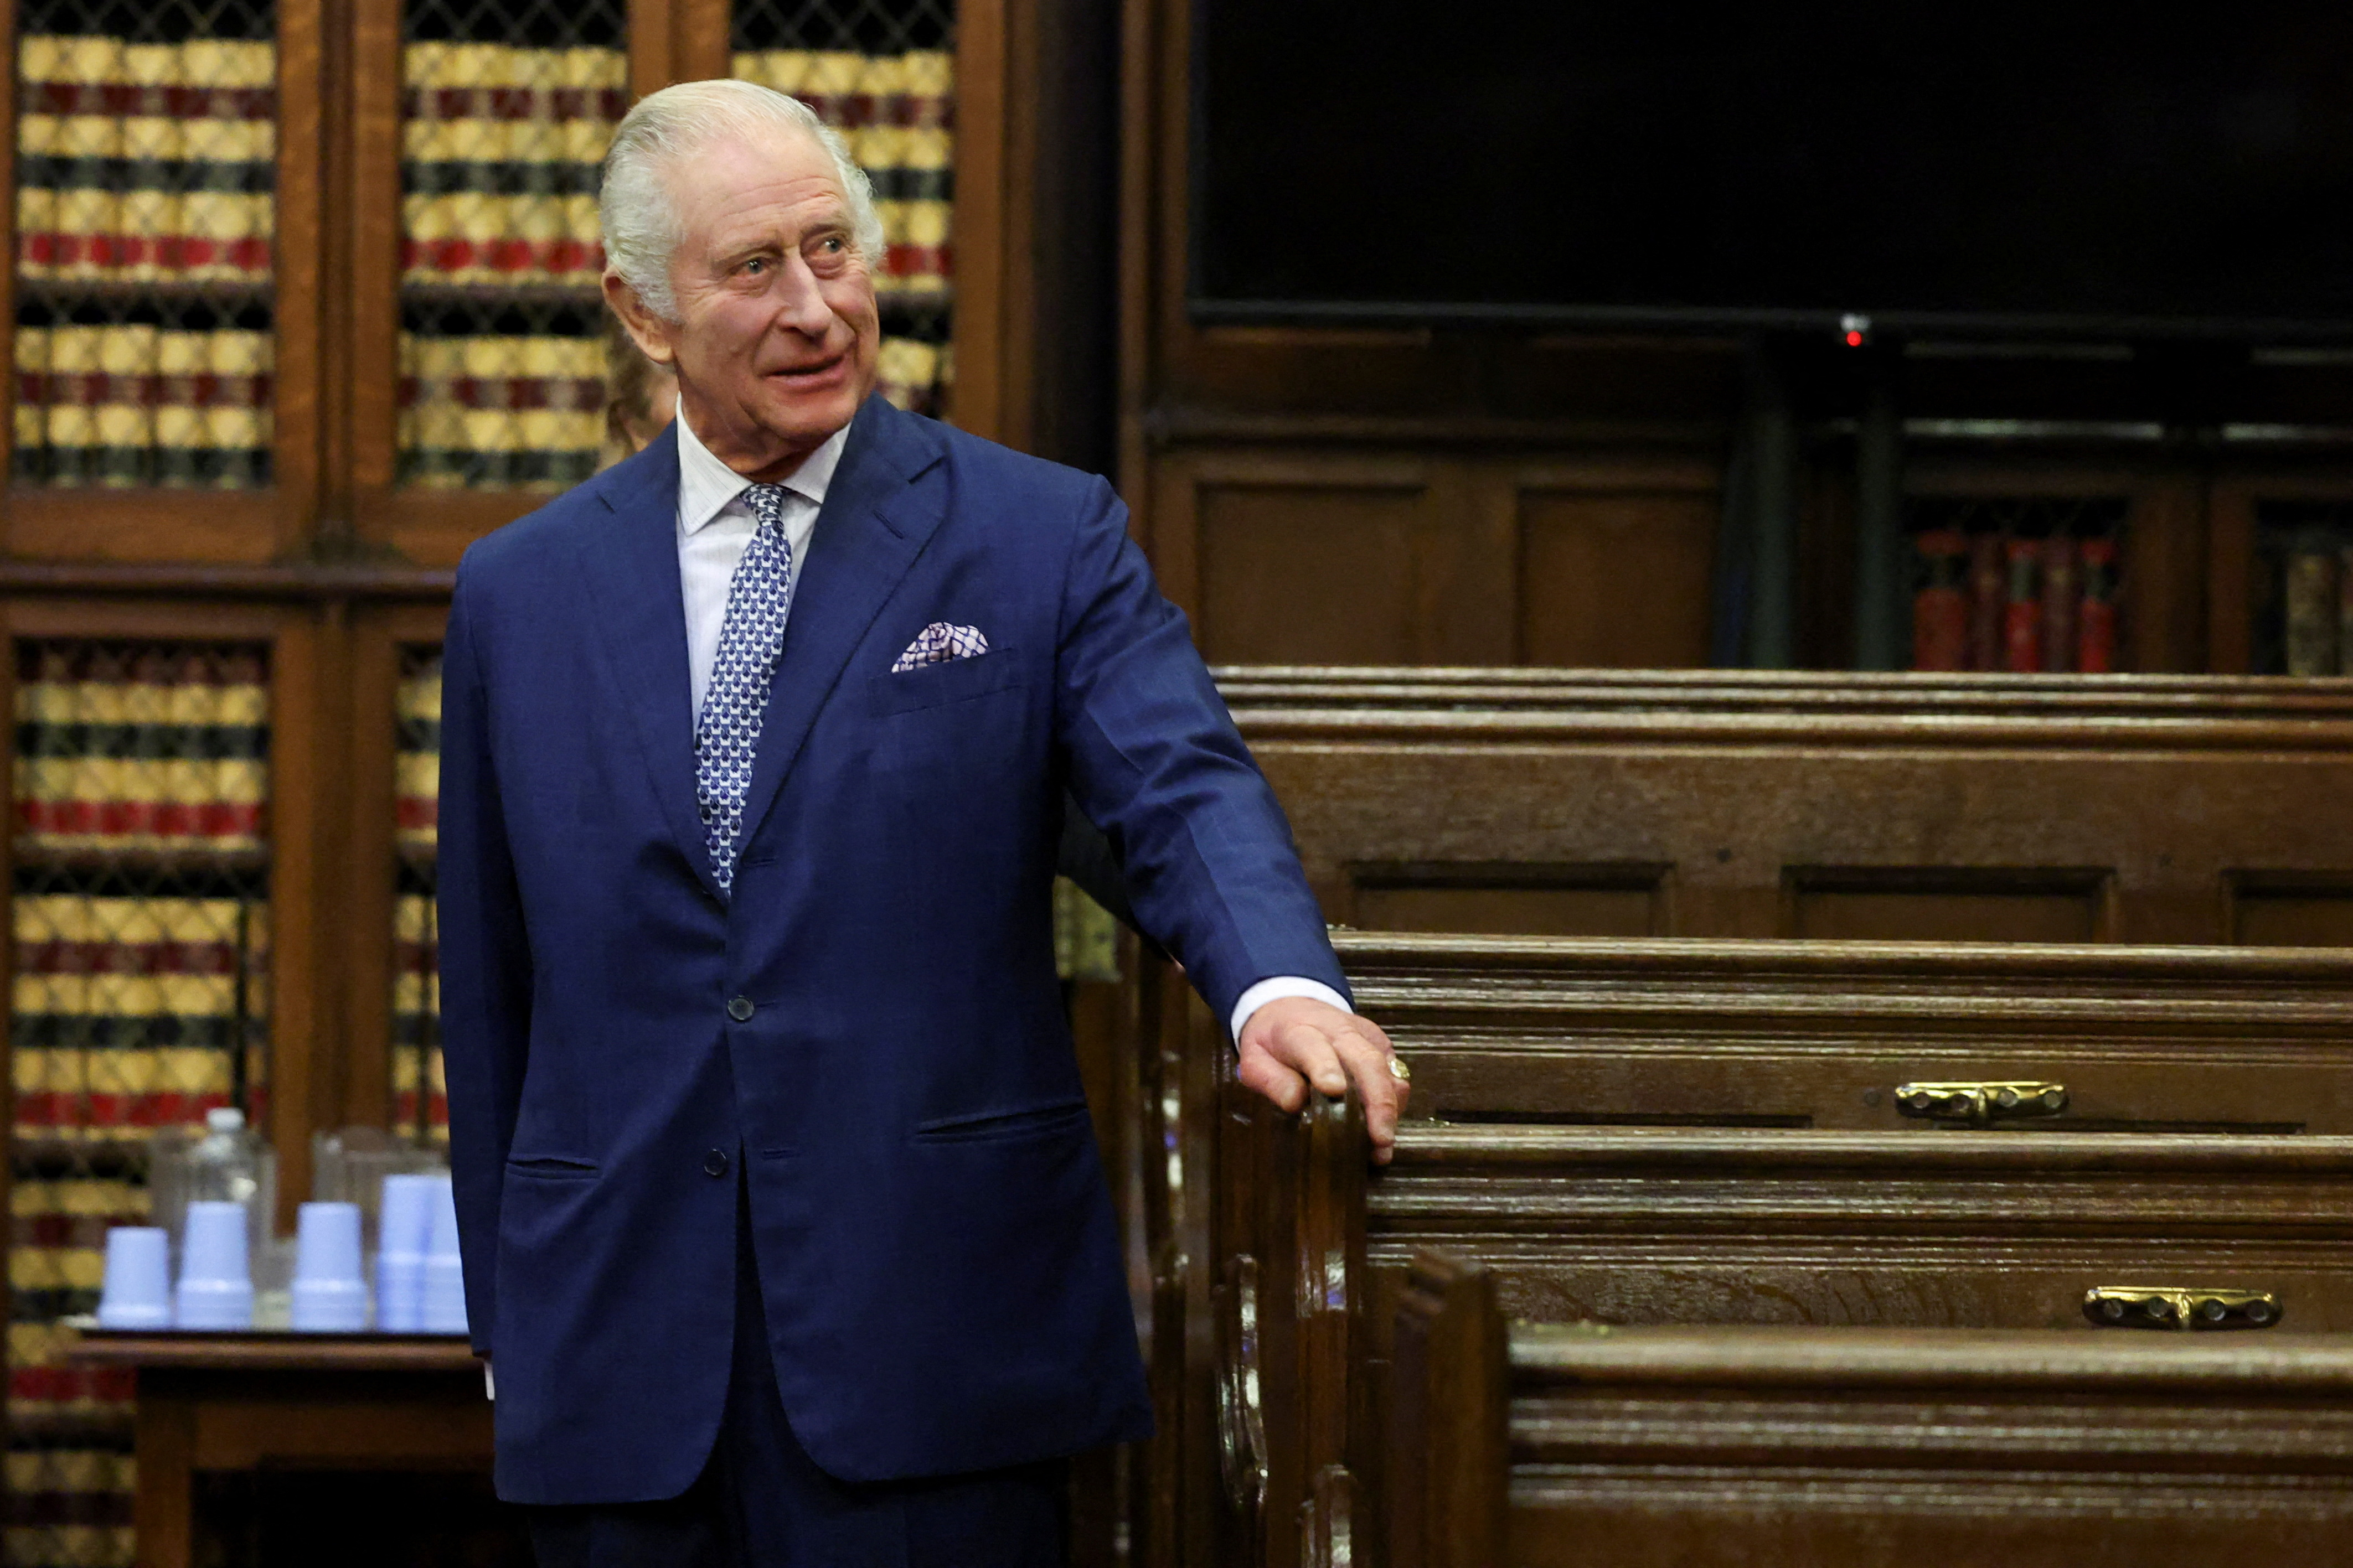 King Charles III visits the Royal Courts of Justice on December 14, 2023 in London, England | Source: Getty Images